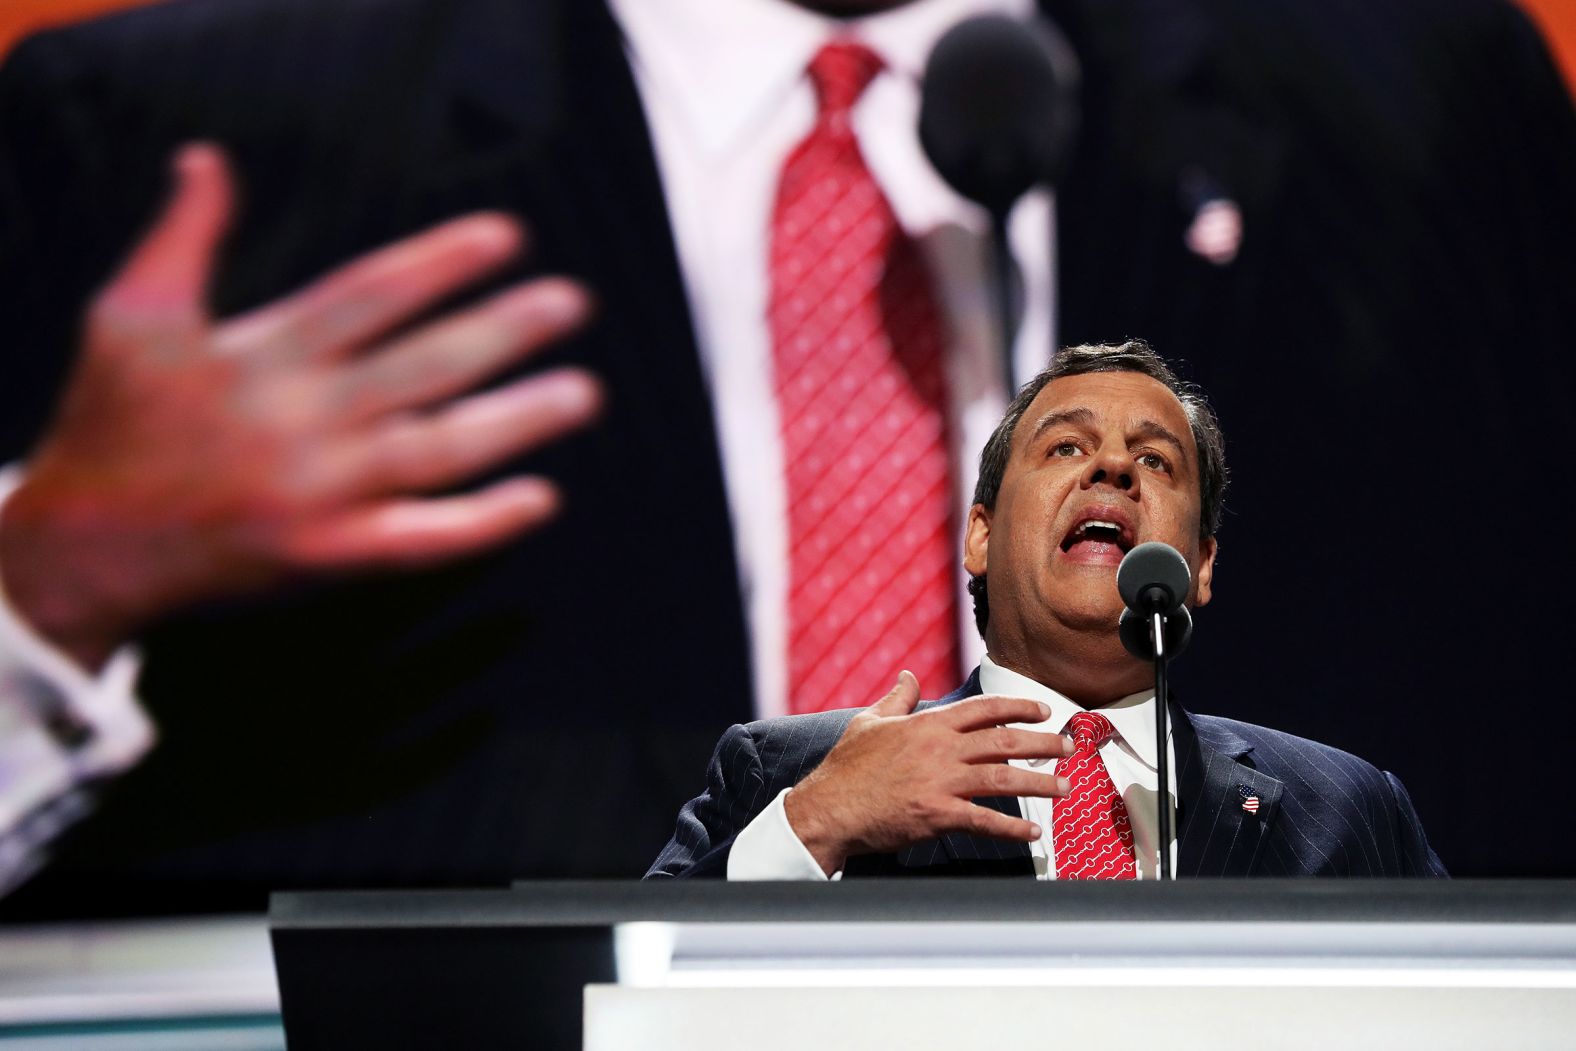 Christie delivers a speech on the second day of the Republican National Convention in July 2016. <a href="index.php?page=&url=http%3A%2F%2Fwww.cnn.com%2F2016%2F07%2F19%2Fpolitics%2Fdonald-trump-republican-convention-day-two%2Findex.html" target="_blank">Christie's speech</a> was heavily critical of the Democratic Party's presumptive nominee. "It is our obligation to stop Hillary Clinton now and never let her within 10 miles of the White House again," he said. "It is time to come together and make sure that Donald Trump is our next president. I am proud to be part of this team. Now let's go win this thing."